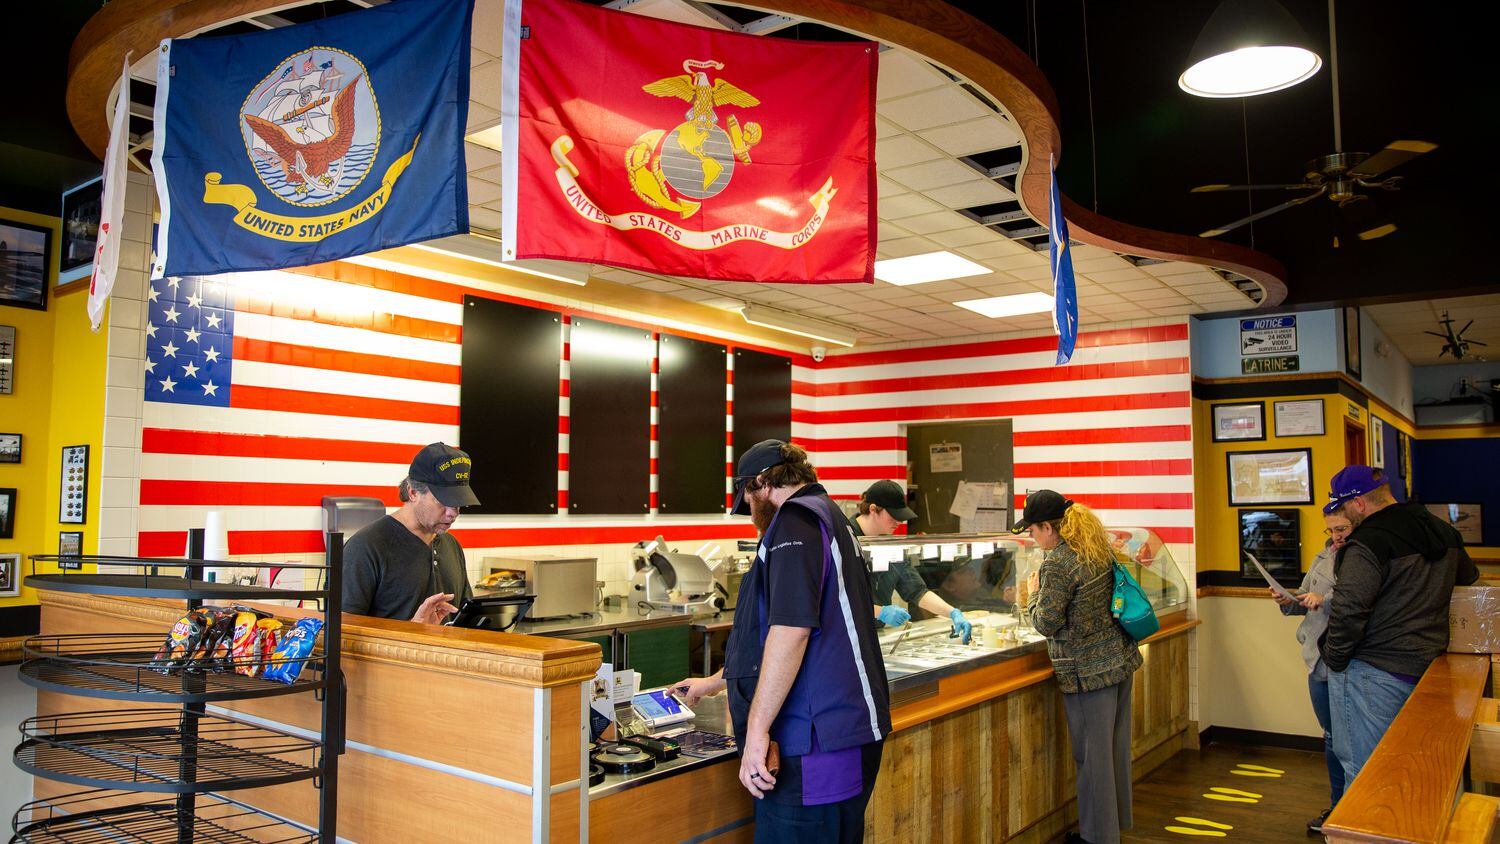 Patriot Sandwich Company was a fast-casual restaurant in Denton run by a veteran. The shop paid tribute to all branches of the military and a portion of the profits went to We Got Your Six, a nonprofit that helps homeless veterans. Owner David Jordan was promised Restaurant Revitalization Funds that were never paid, and he had to close the restaurant in November 2021.